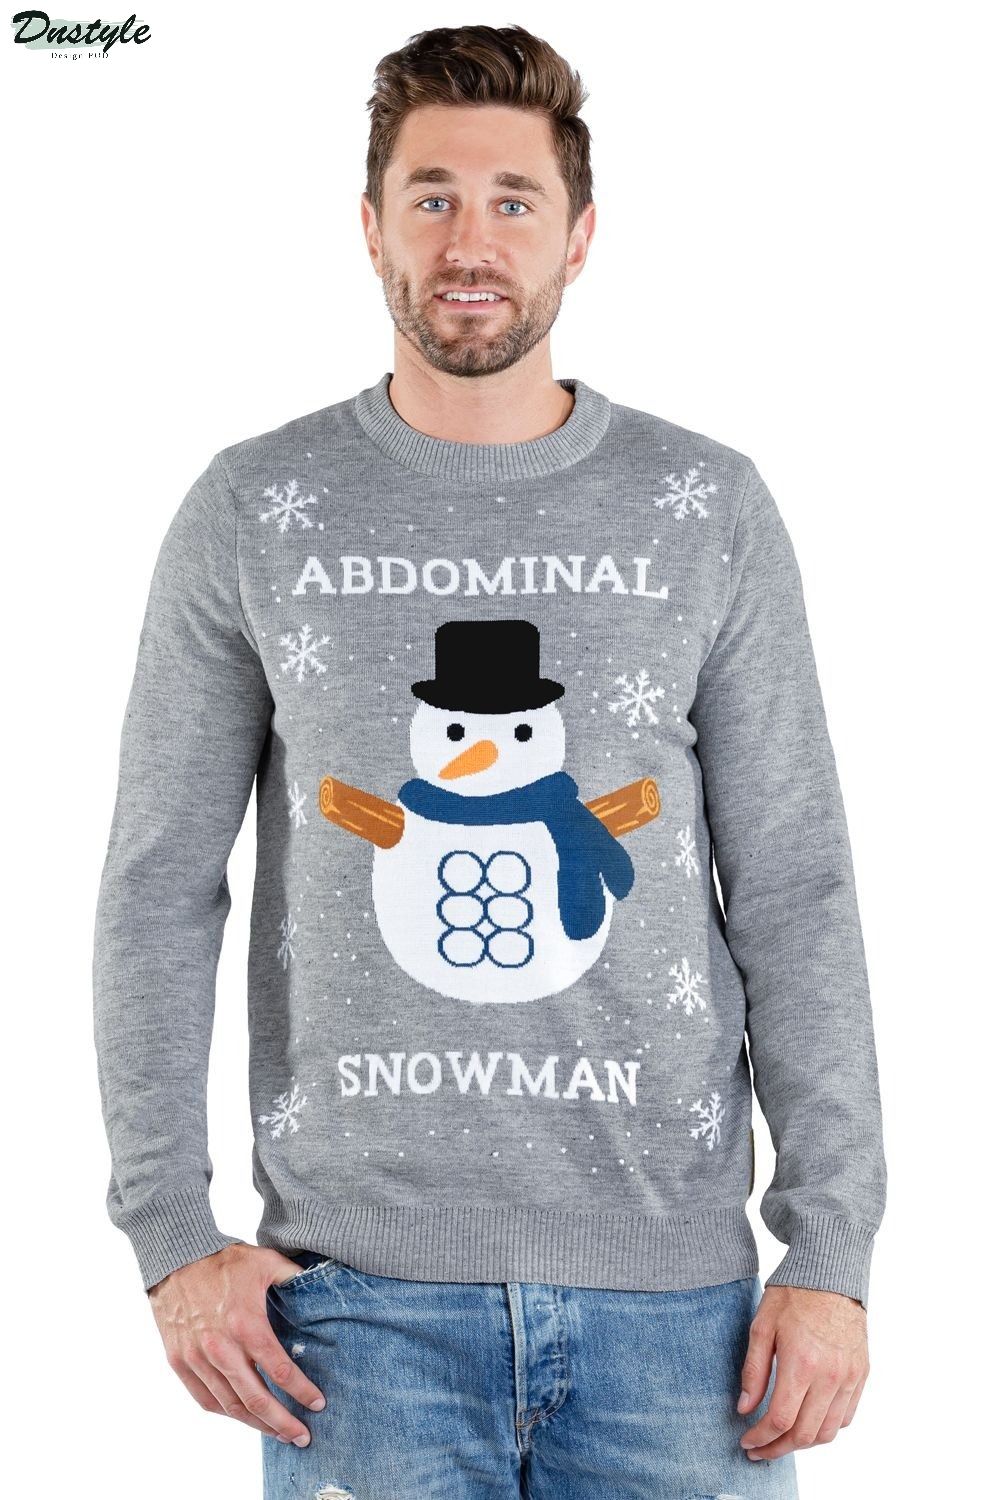 Abdominal Snowman Ugly Christmas Sweater 1